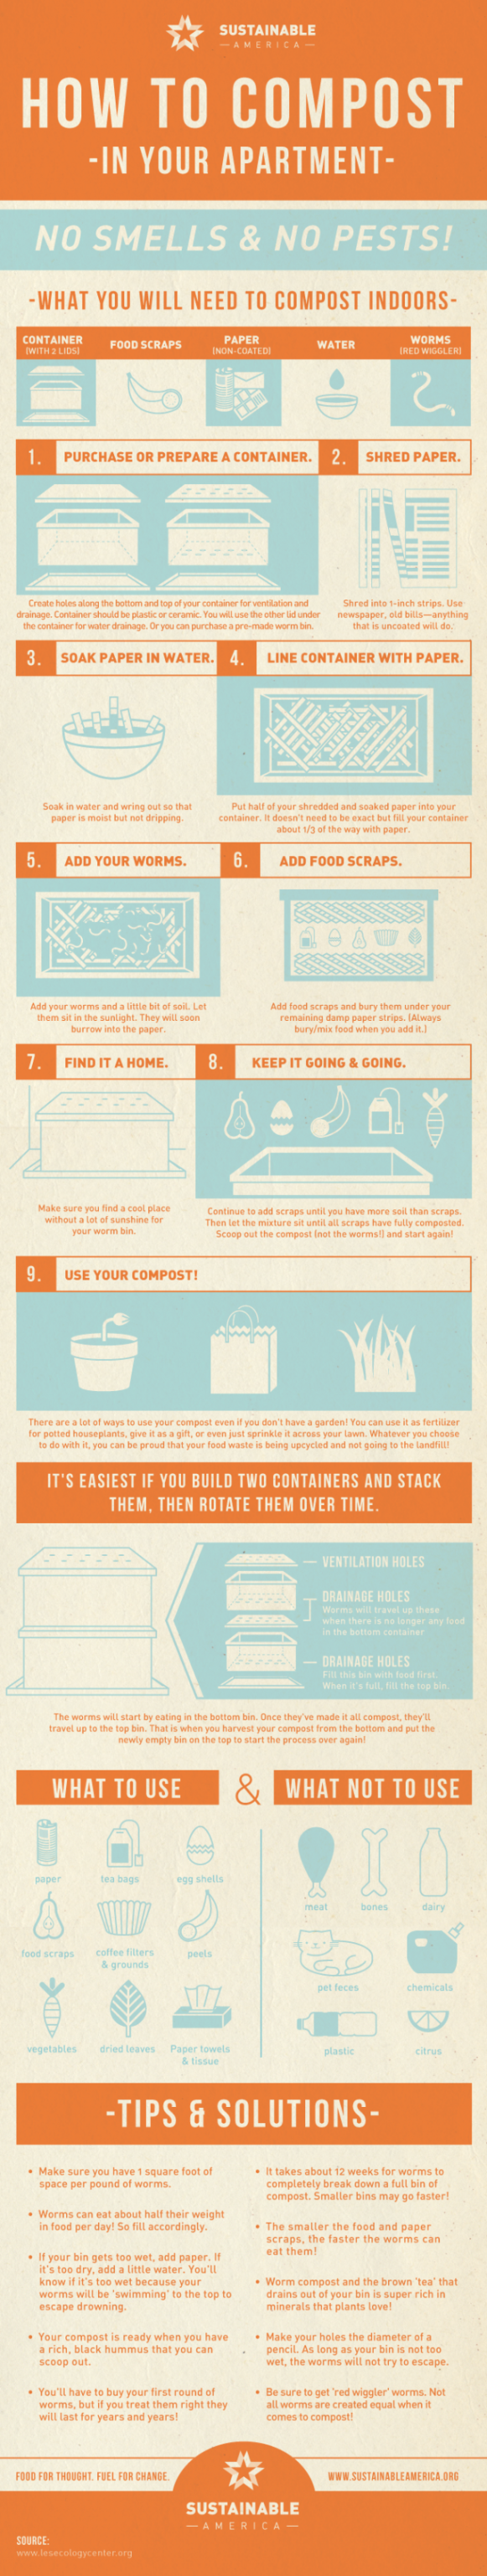 waste tracking wastetracking recycle gardening sustainable america infographic on composting in an apartment